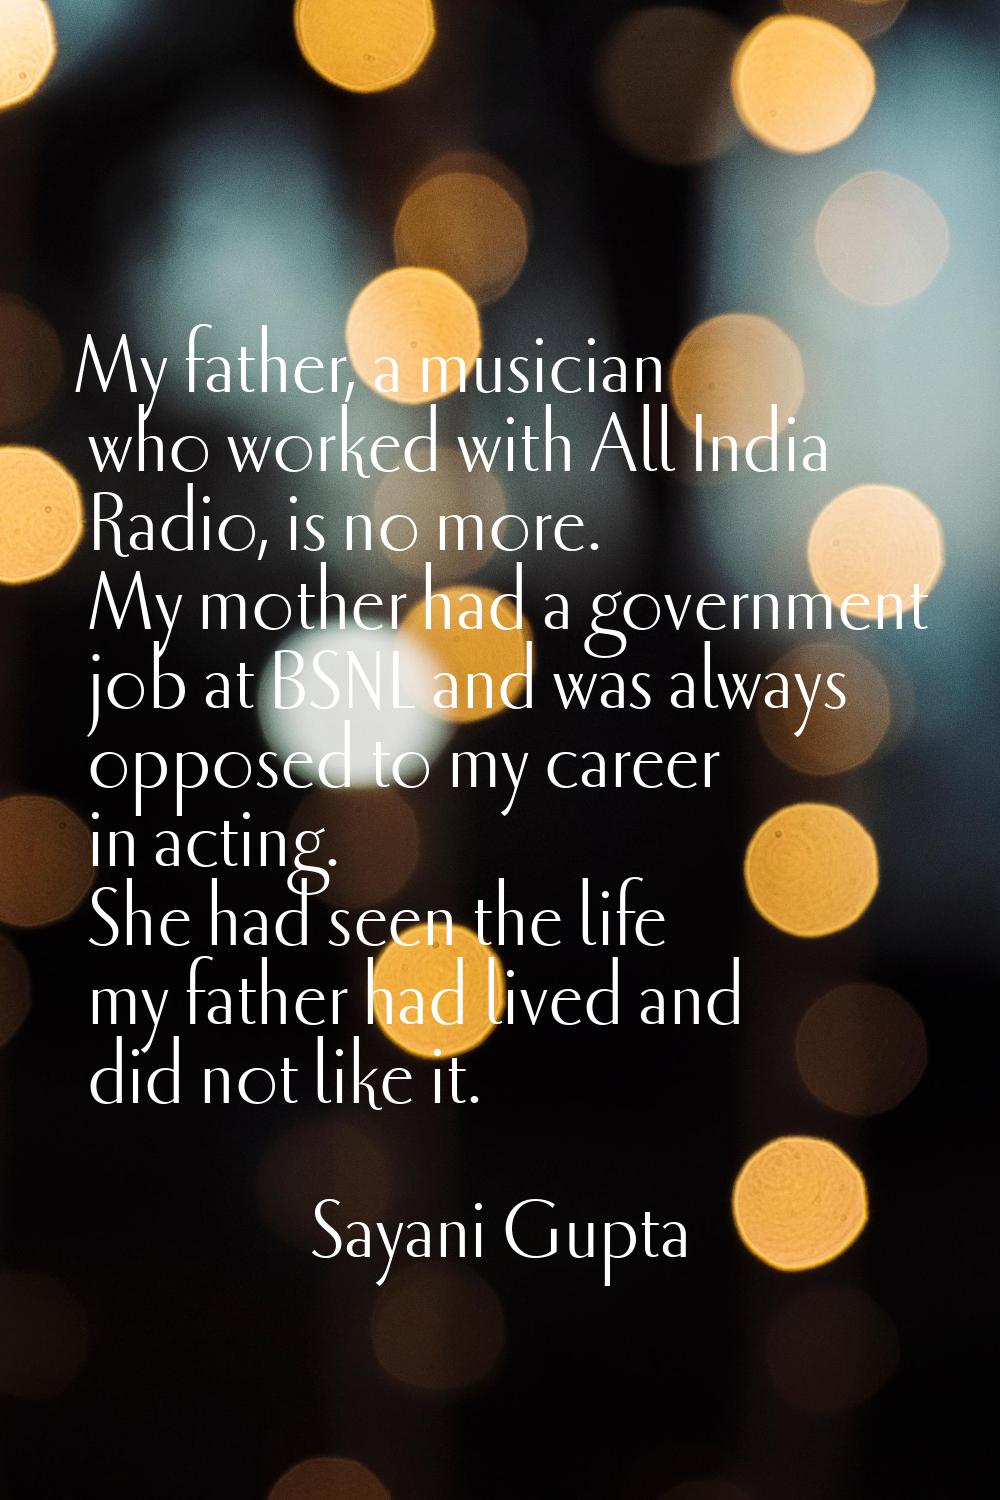 My father, a musician who worked with All India Radio, is no more. My mother had a government job a